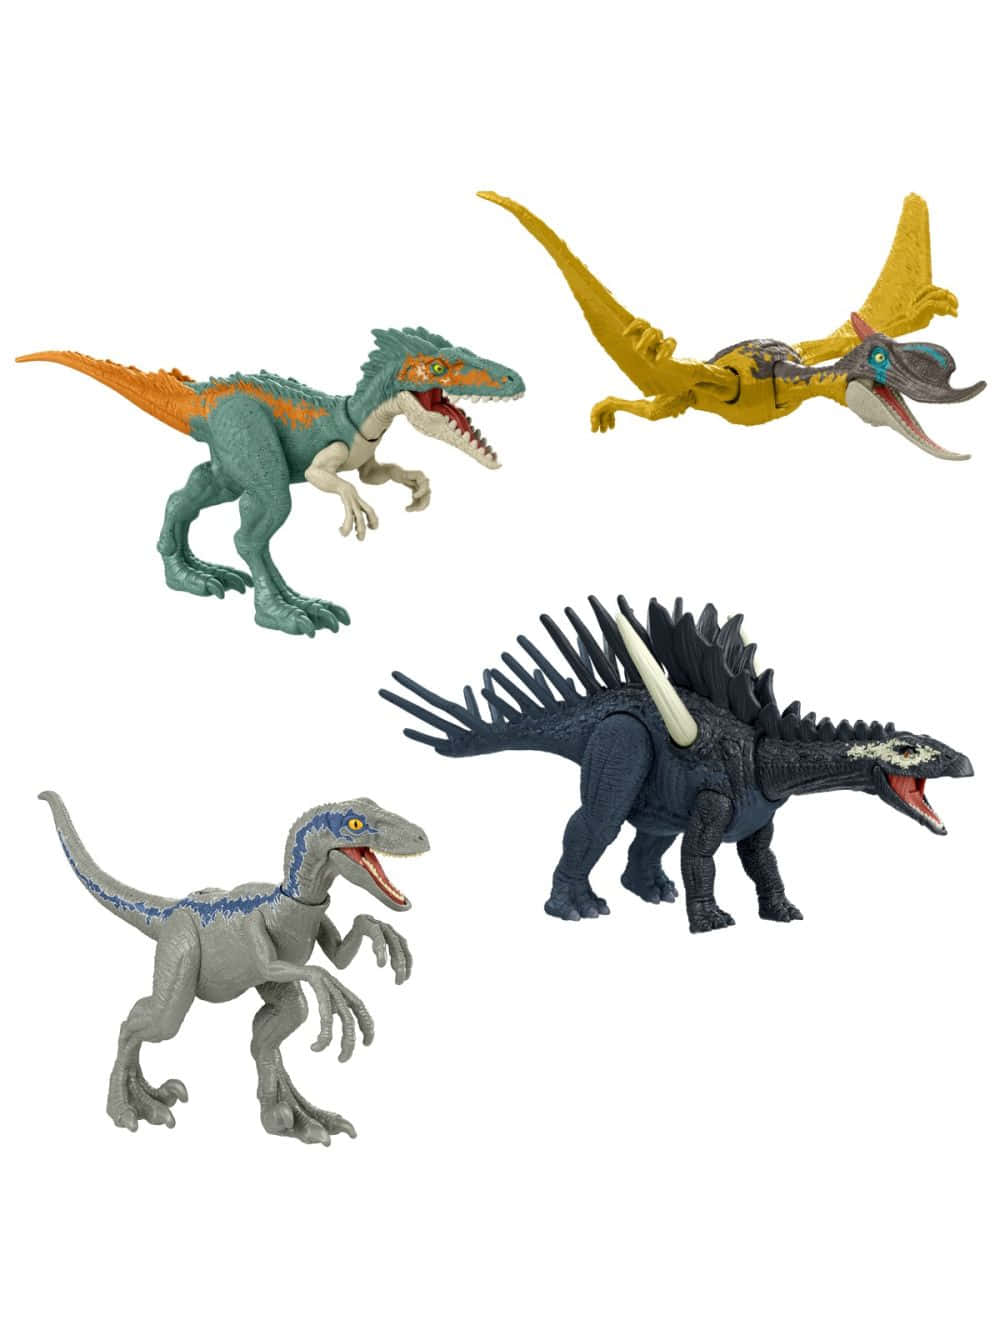 Four Different Dinosaurs Are Shown In Action